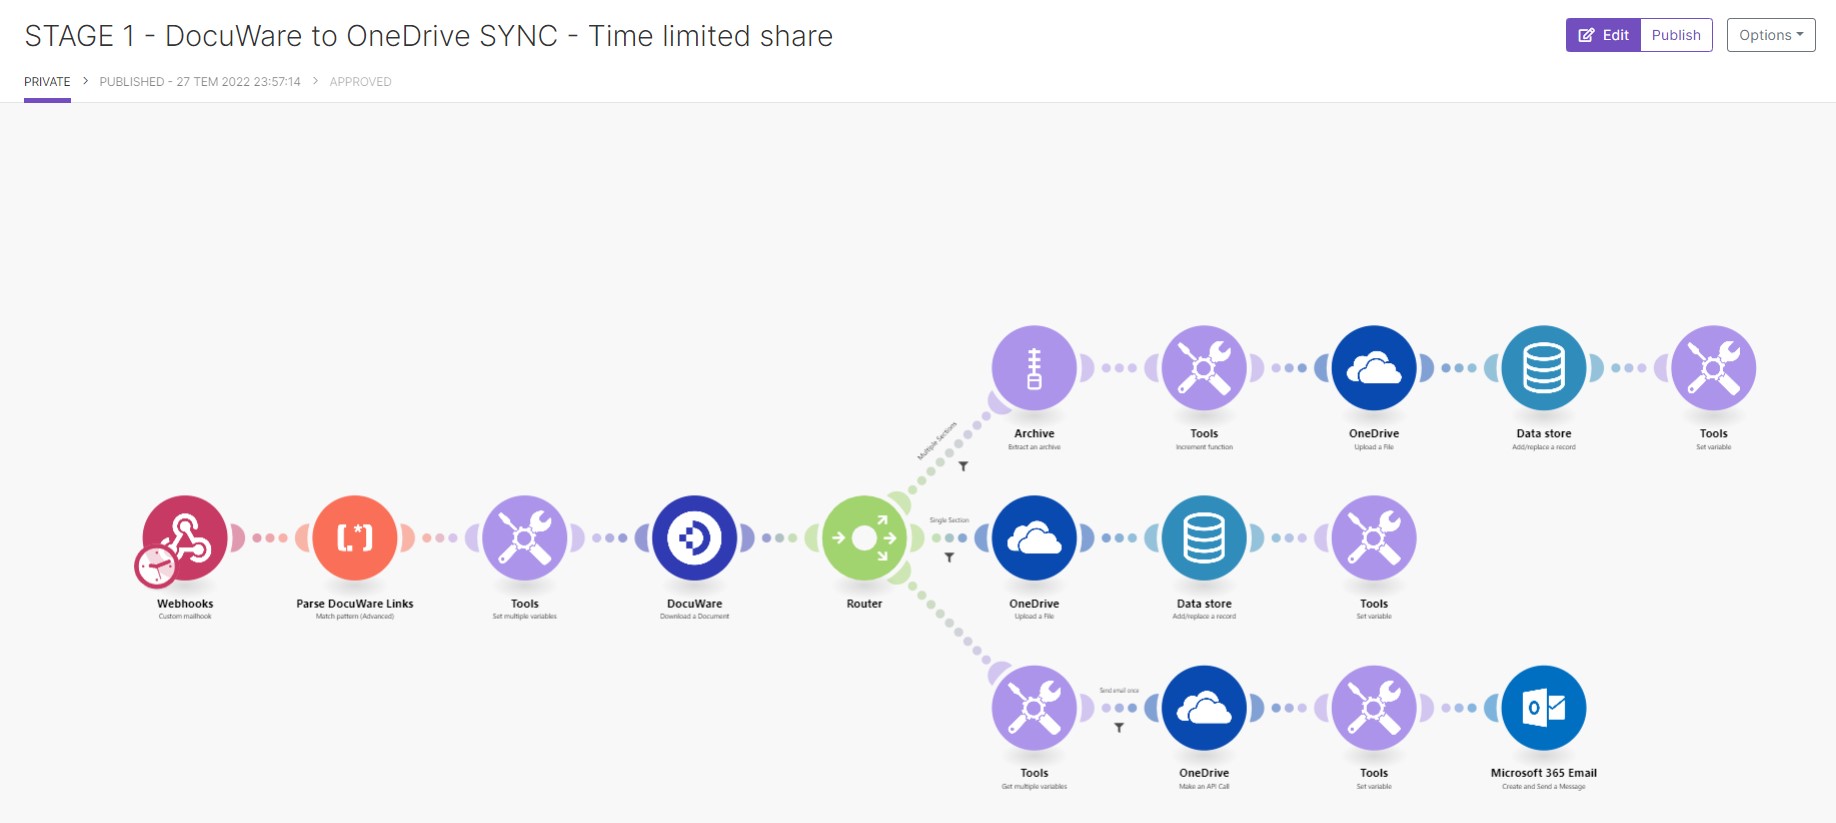 STAGE 1 - DocuWare to OneDrive SYNC - Time limited share